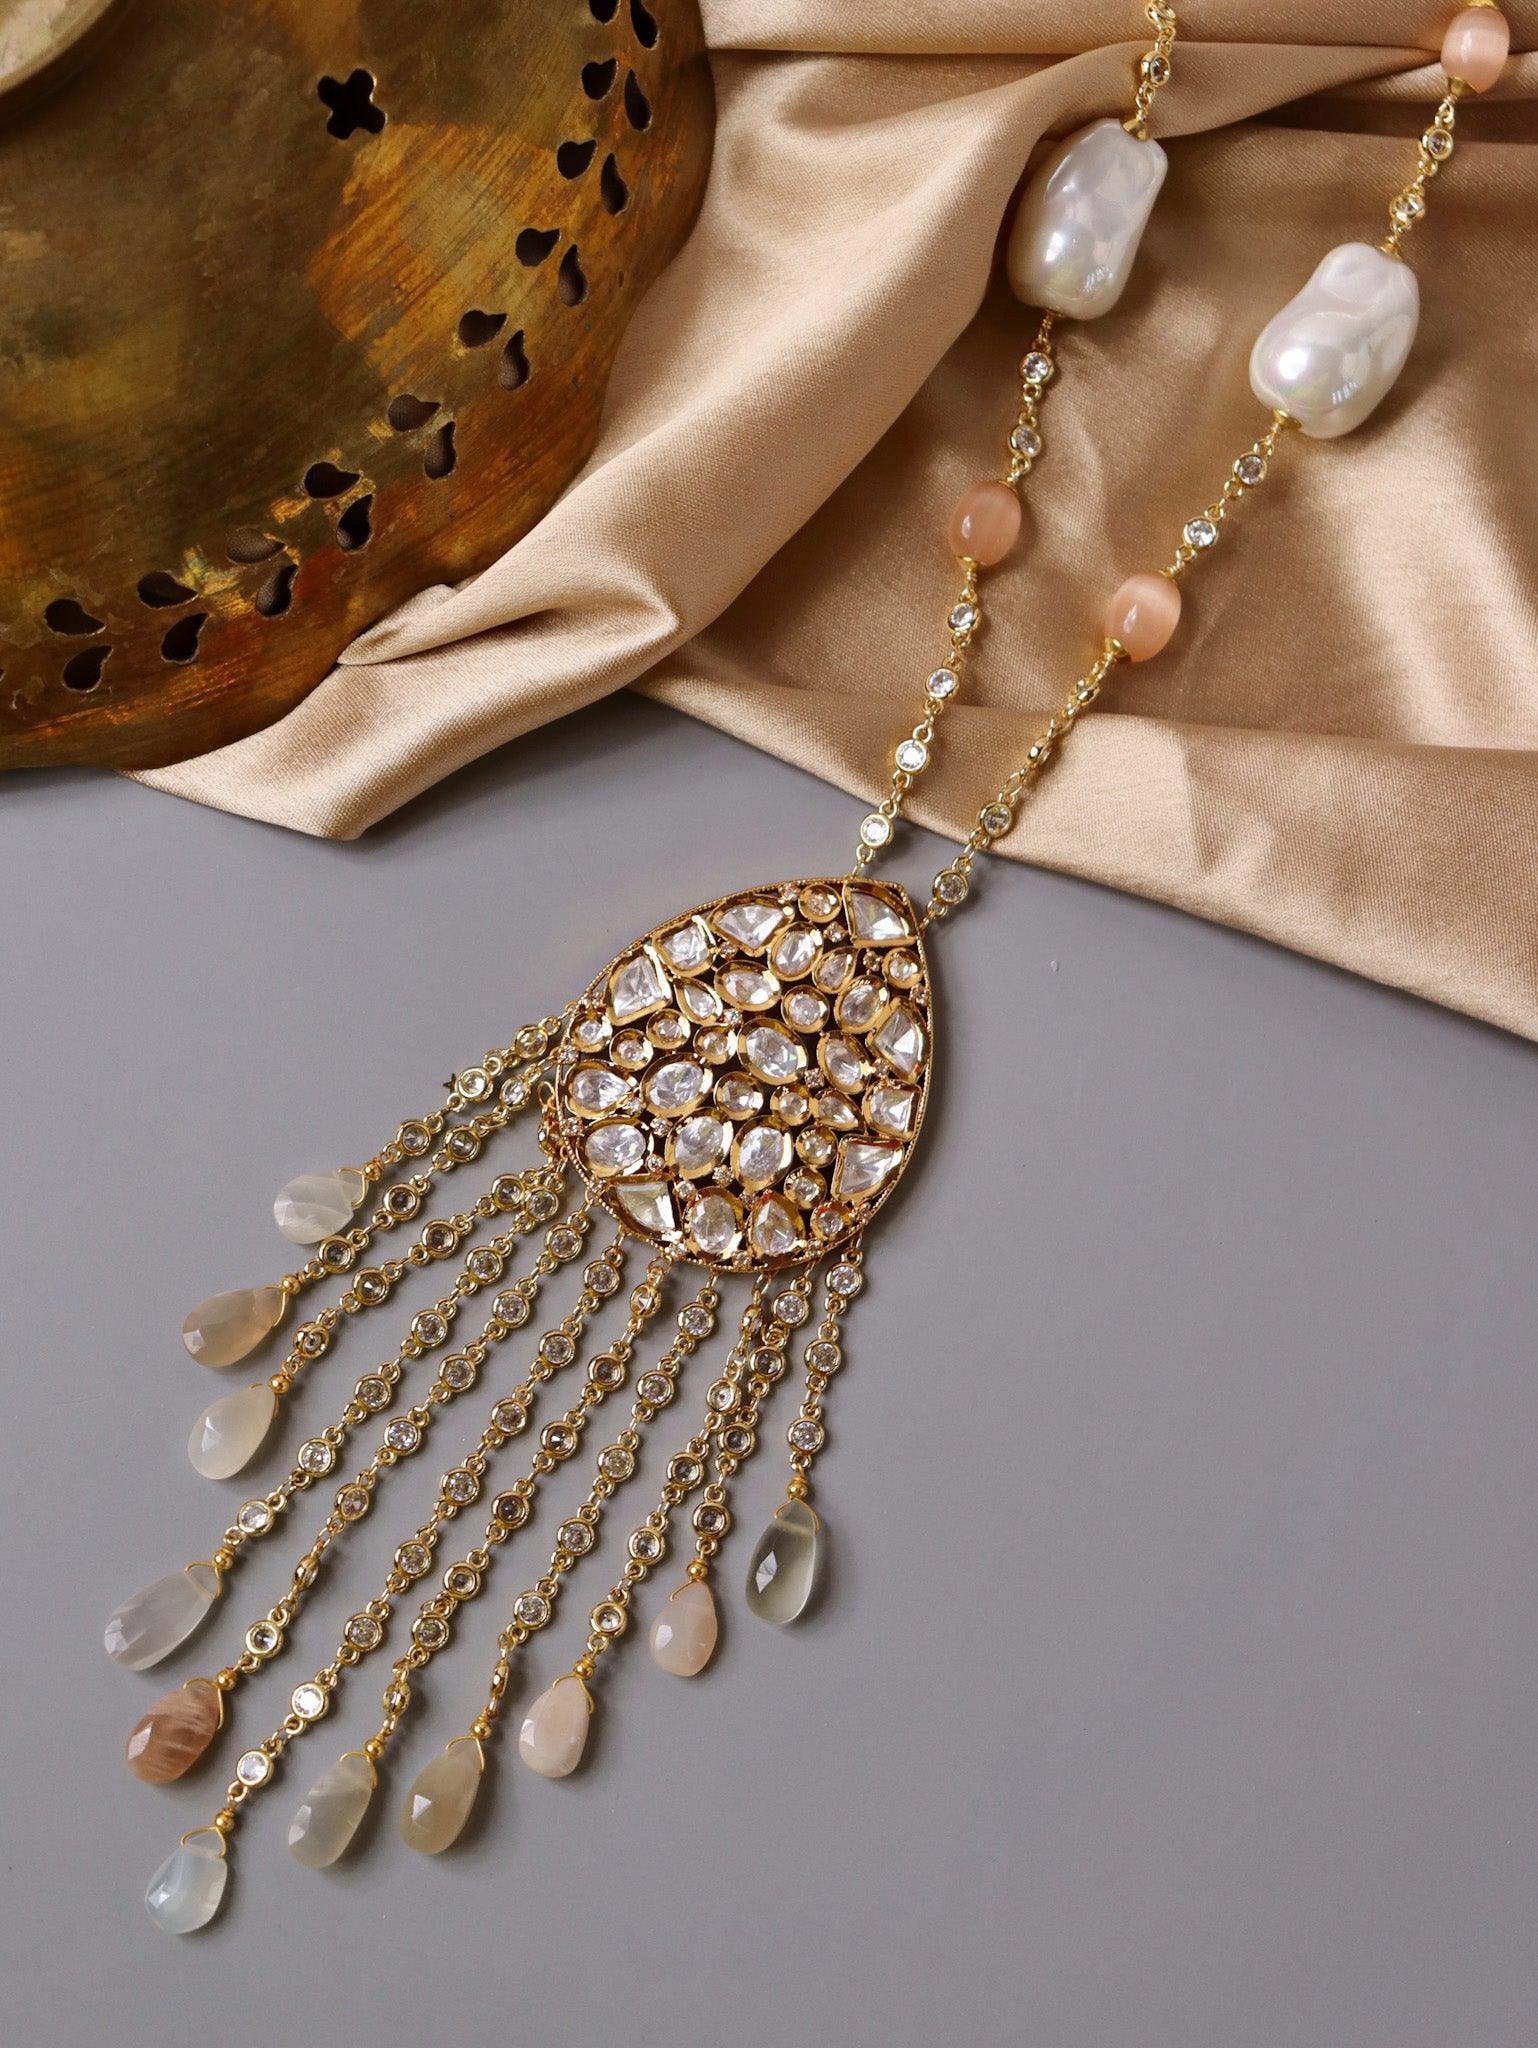 Stone Appeal Pearls and Coloured Stones Embellished Crystal Long Necklace - Curio Cottage Stone Appeal Pearls and Coloured Stones Embellished Crystal Long Necklace